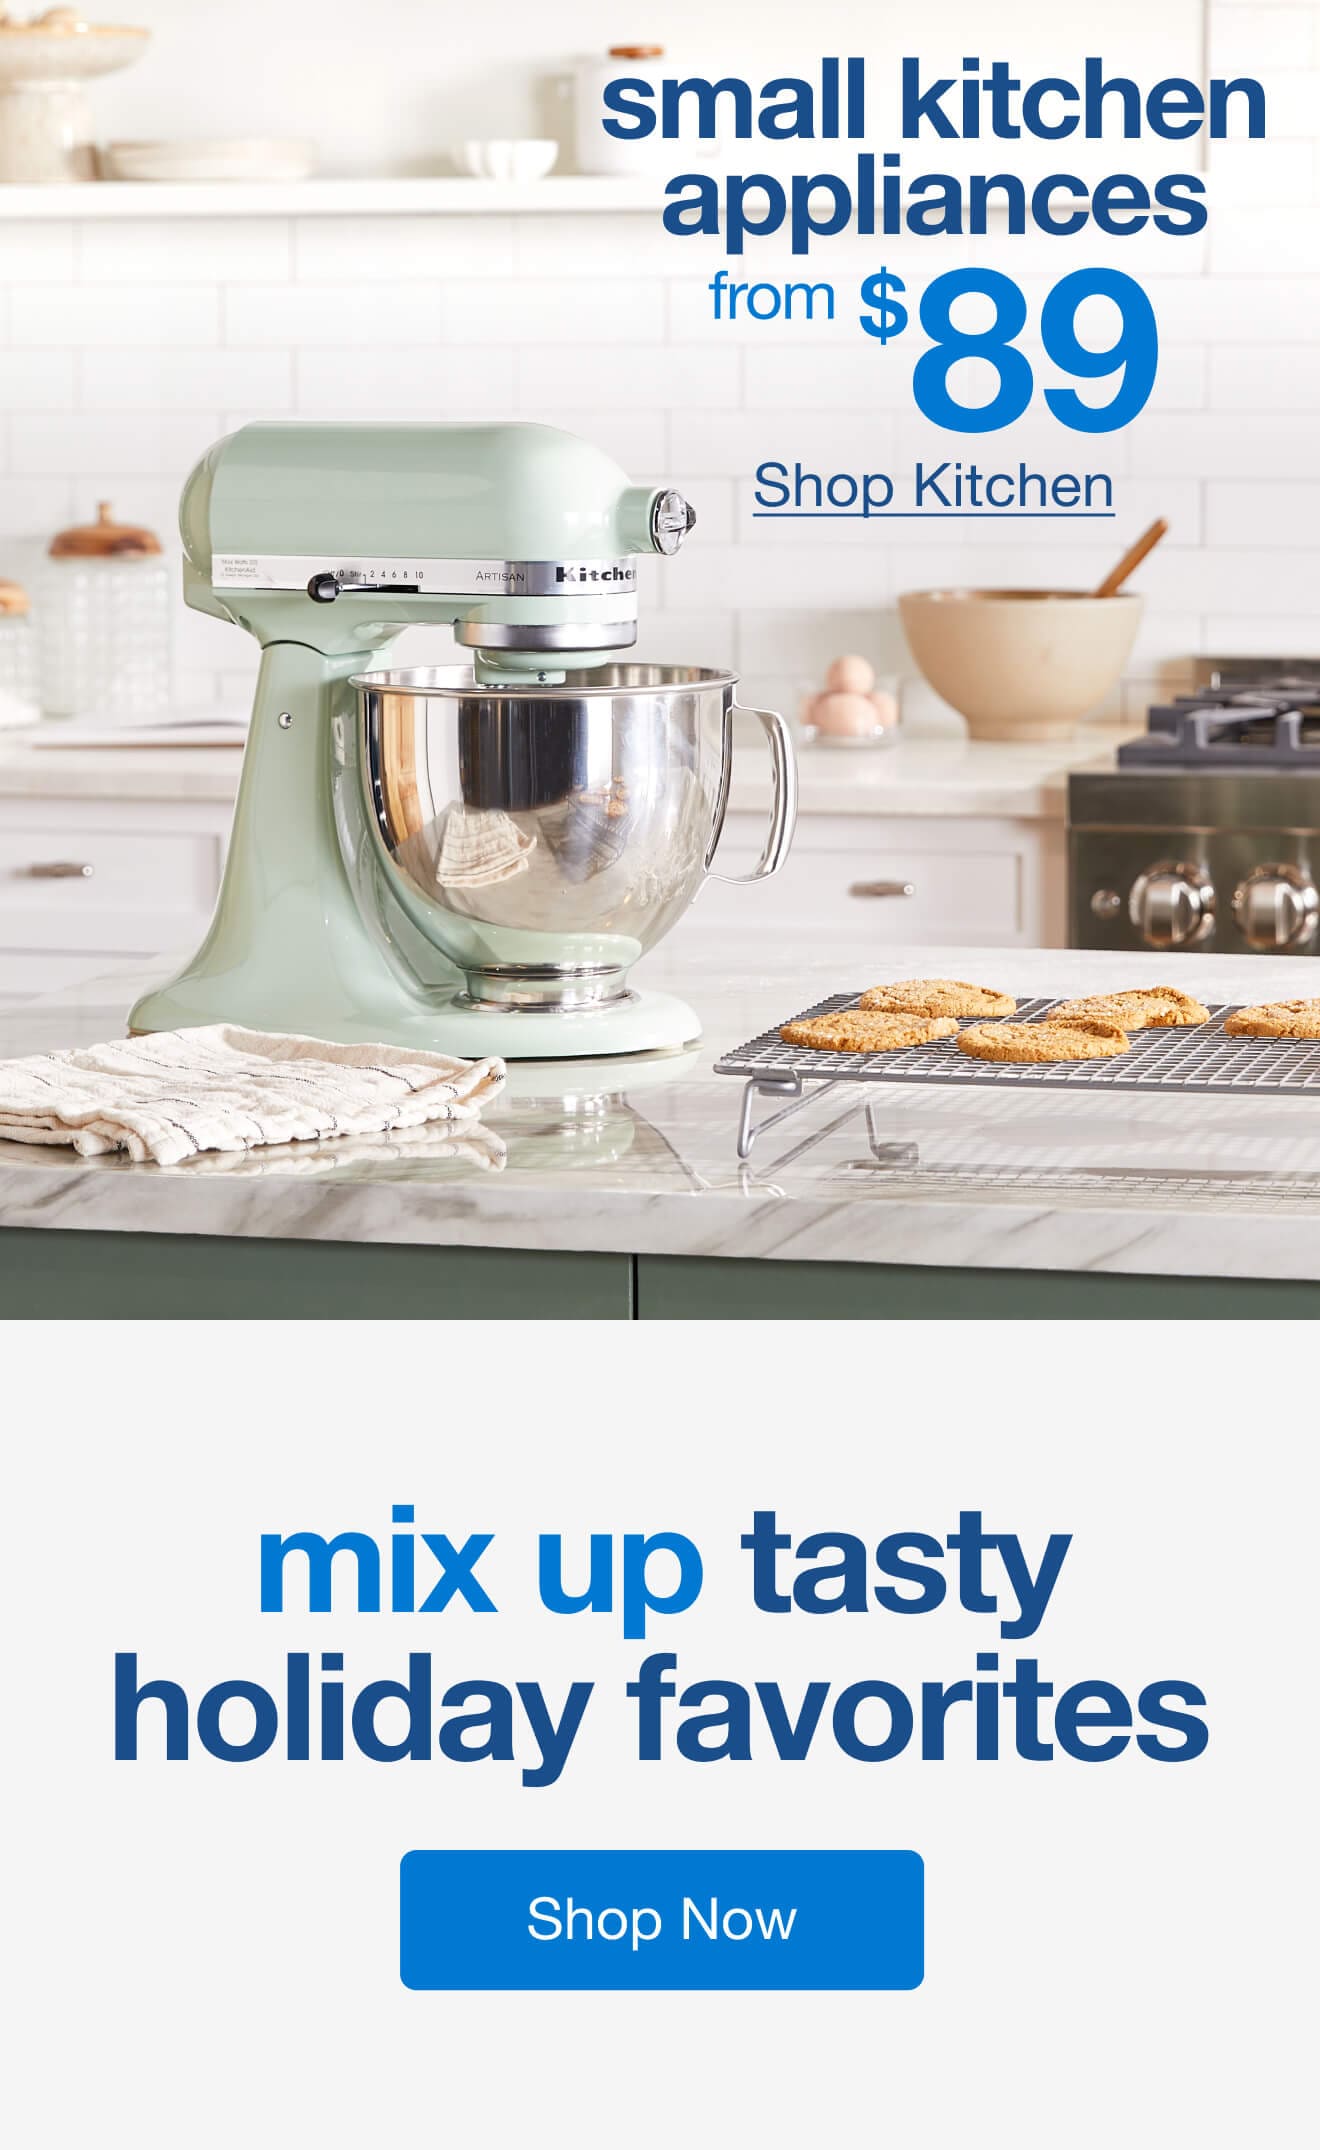 Small Kitchen Appliances From $89 — Shop Now!